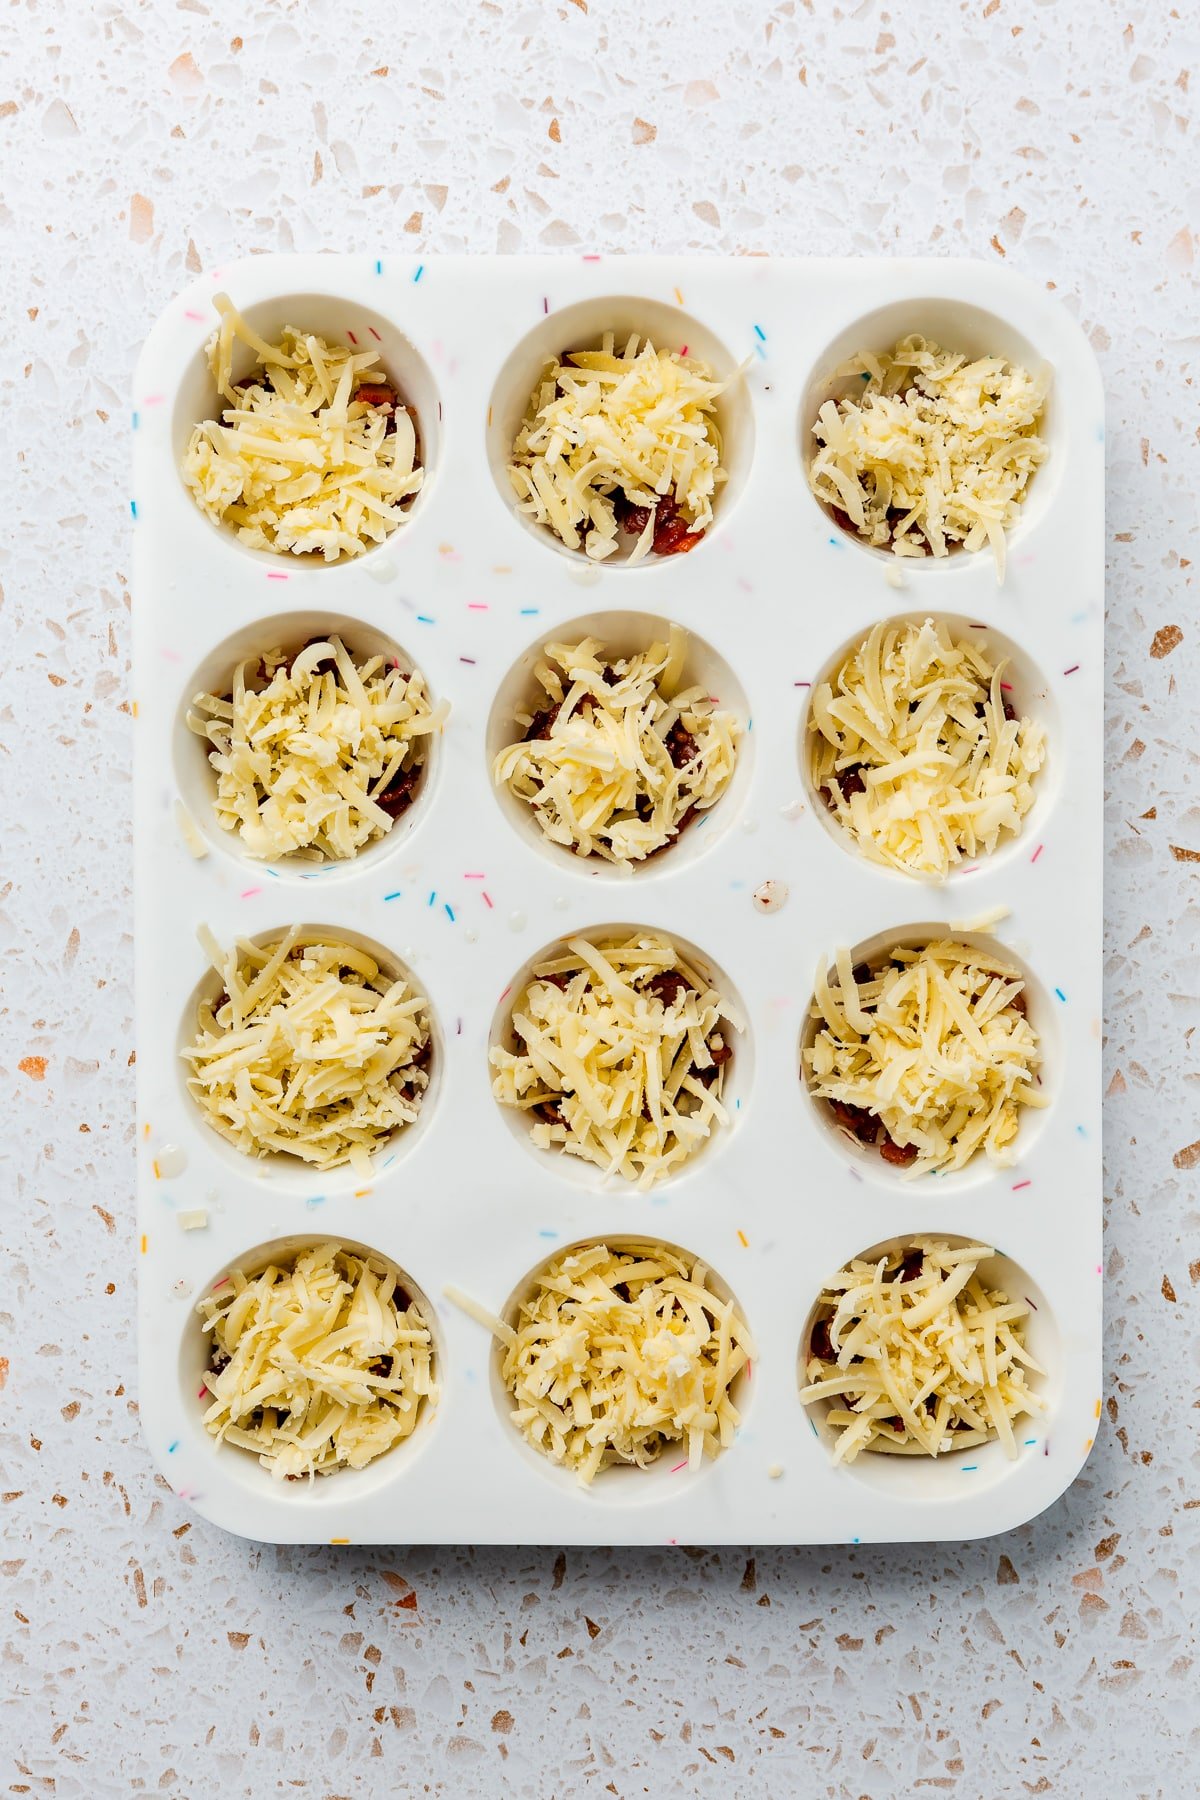 A white shredded cheesed other ingredients have been placed in the bottom of a white, silicone muffin tray.